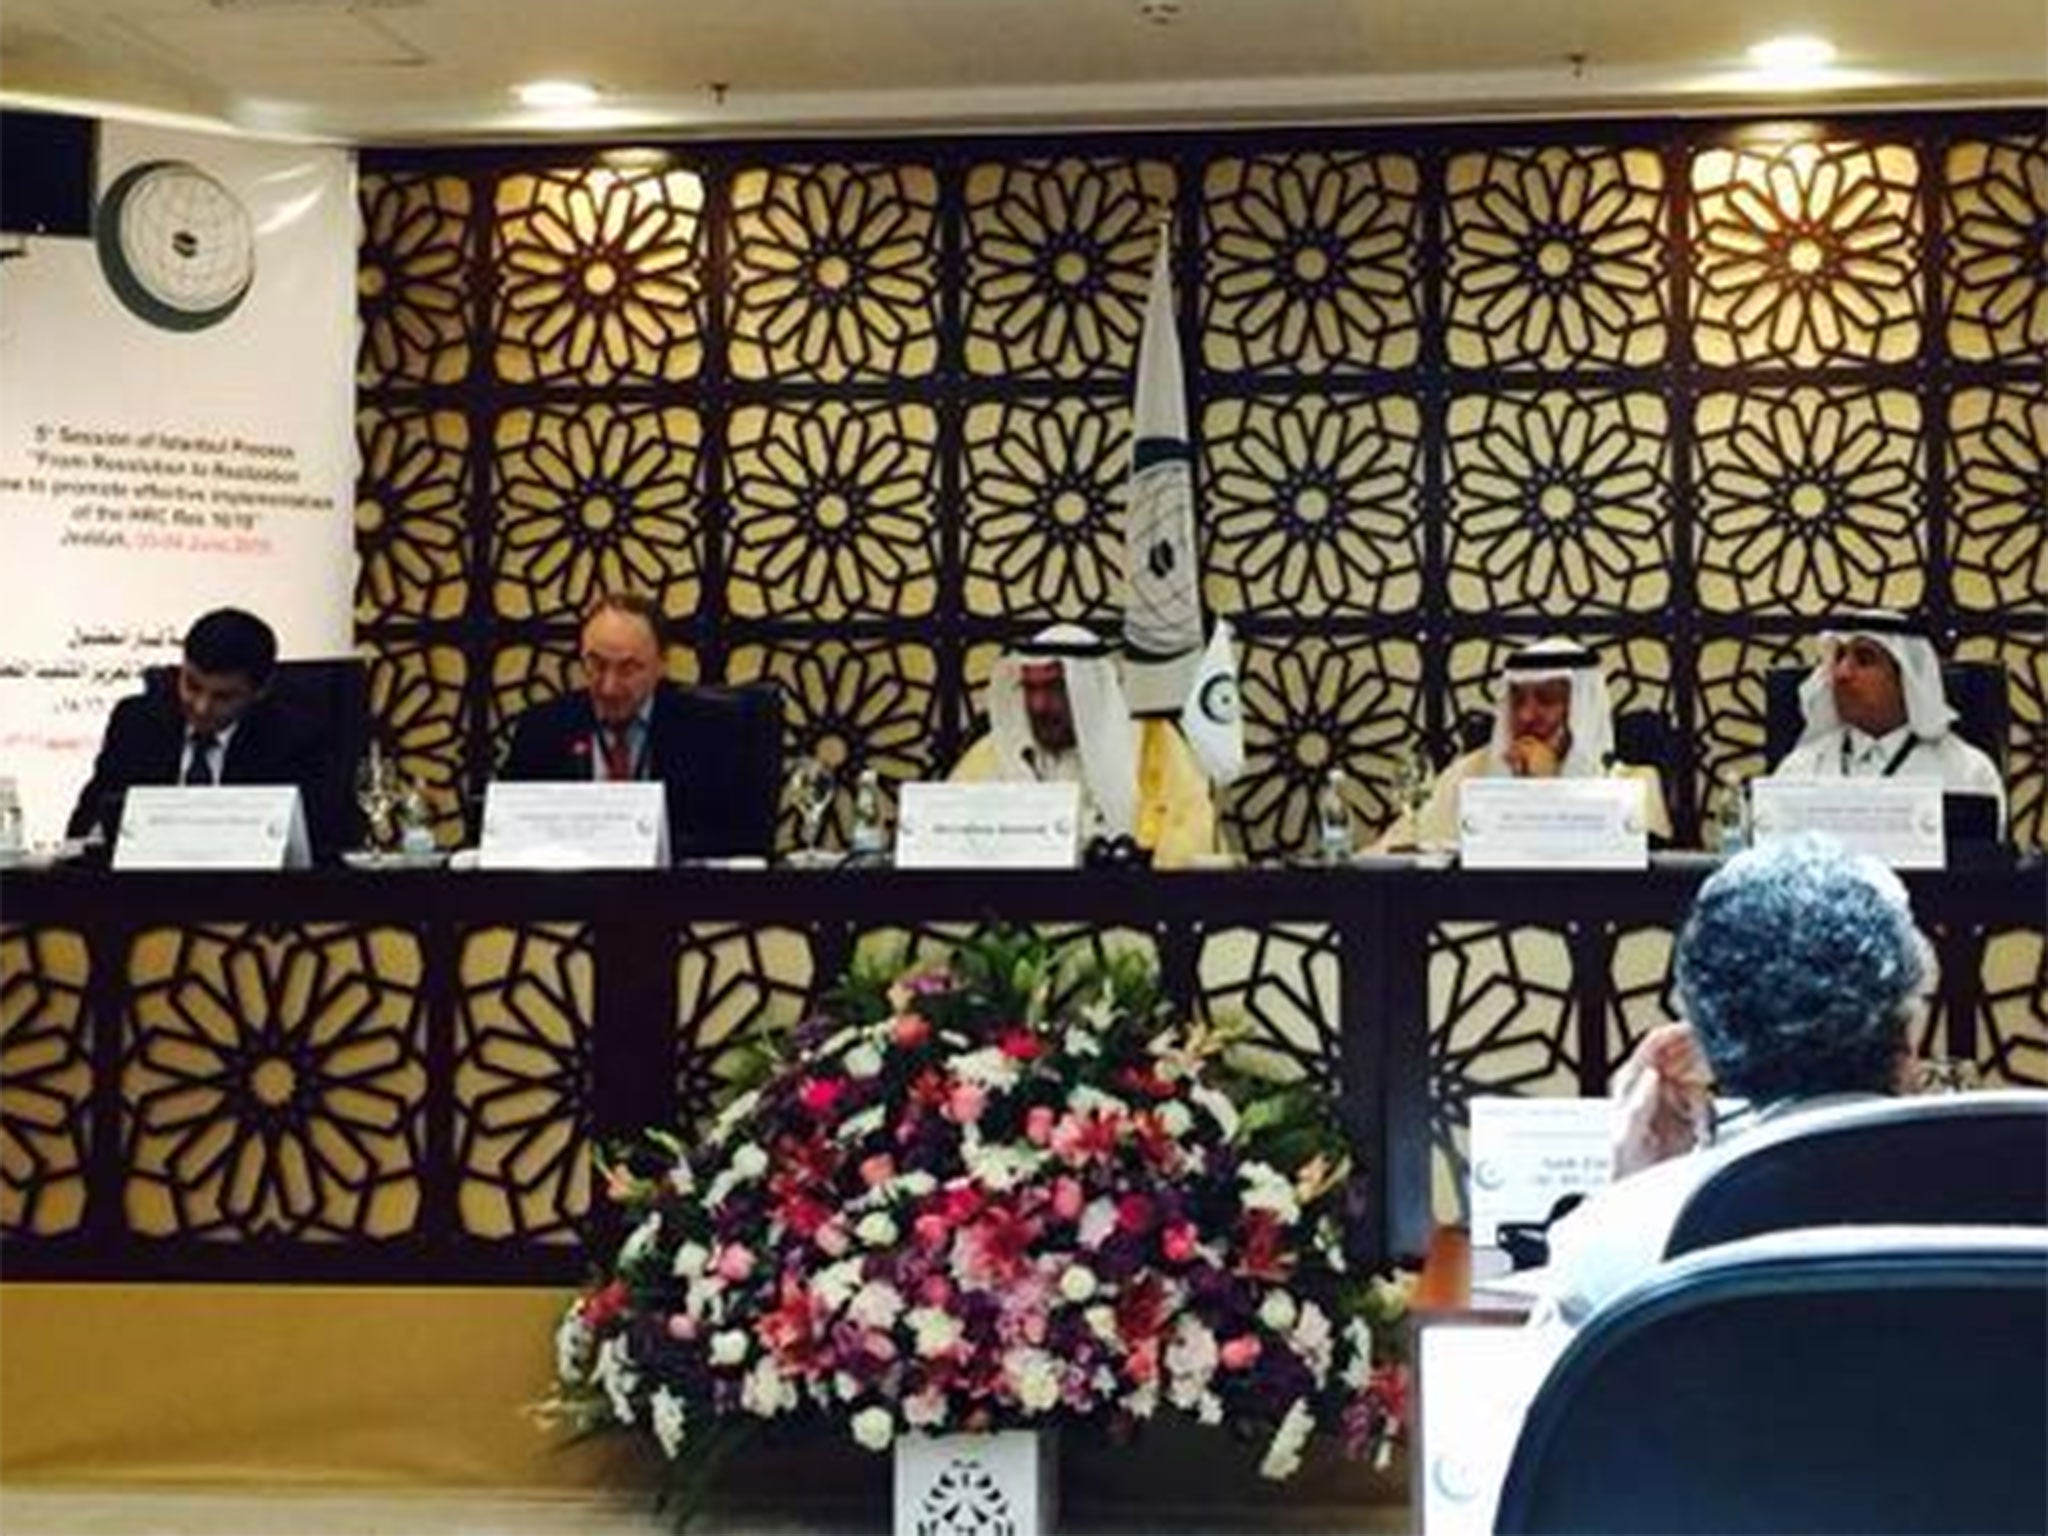 UN HRC president Joachim Rücker, second from left, attends the 5th meeting of the Istanbul Process in Jeddah